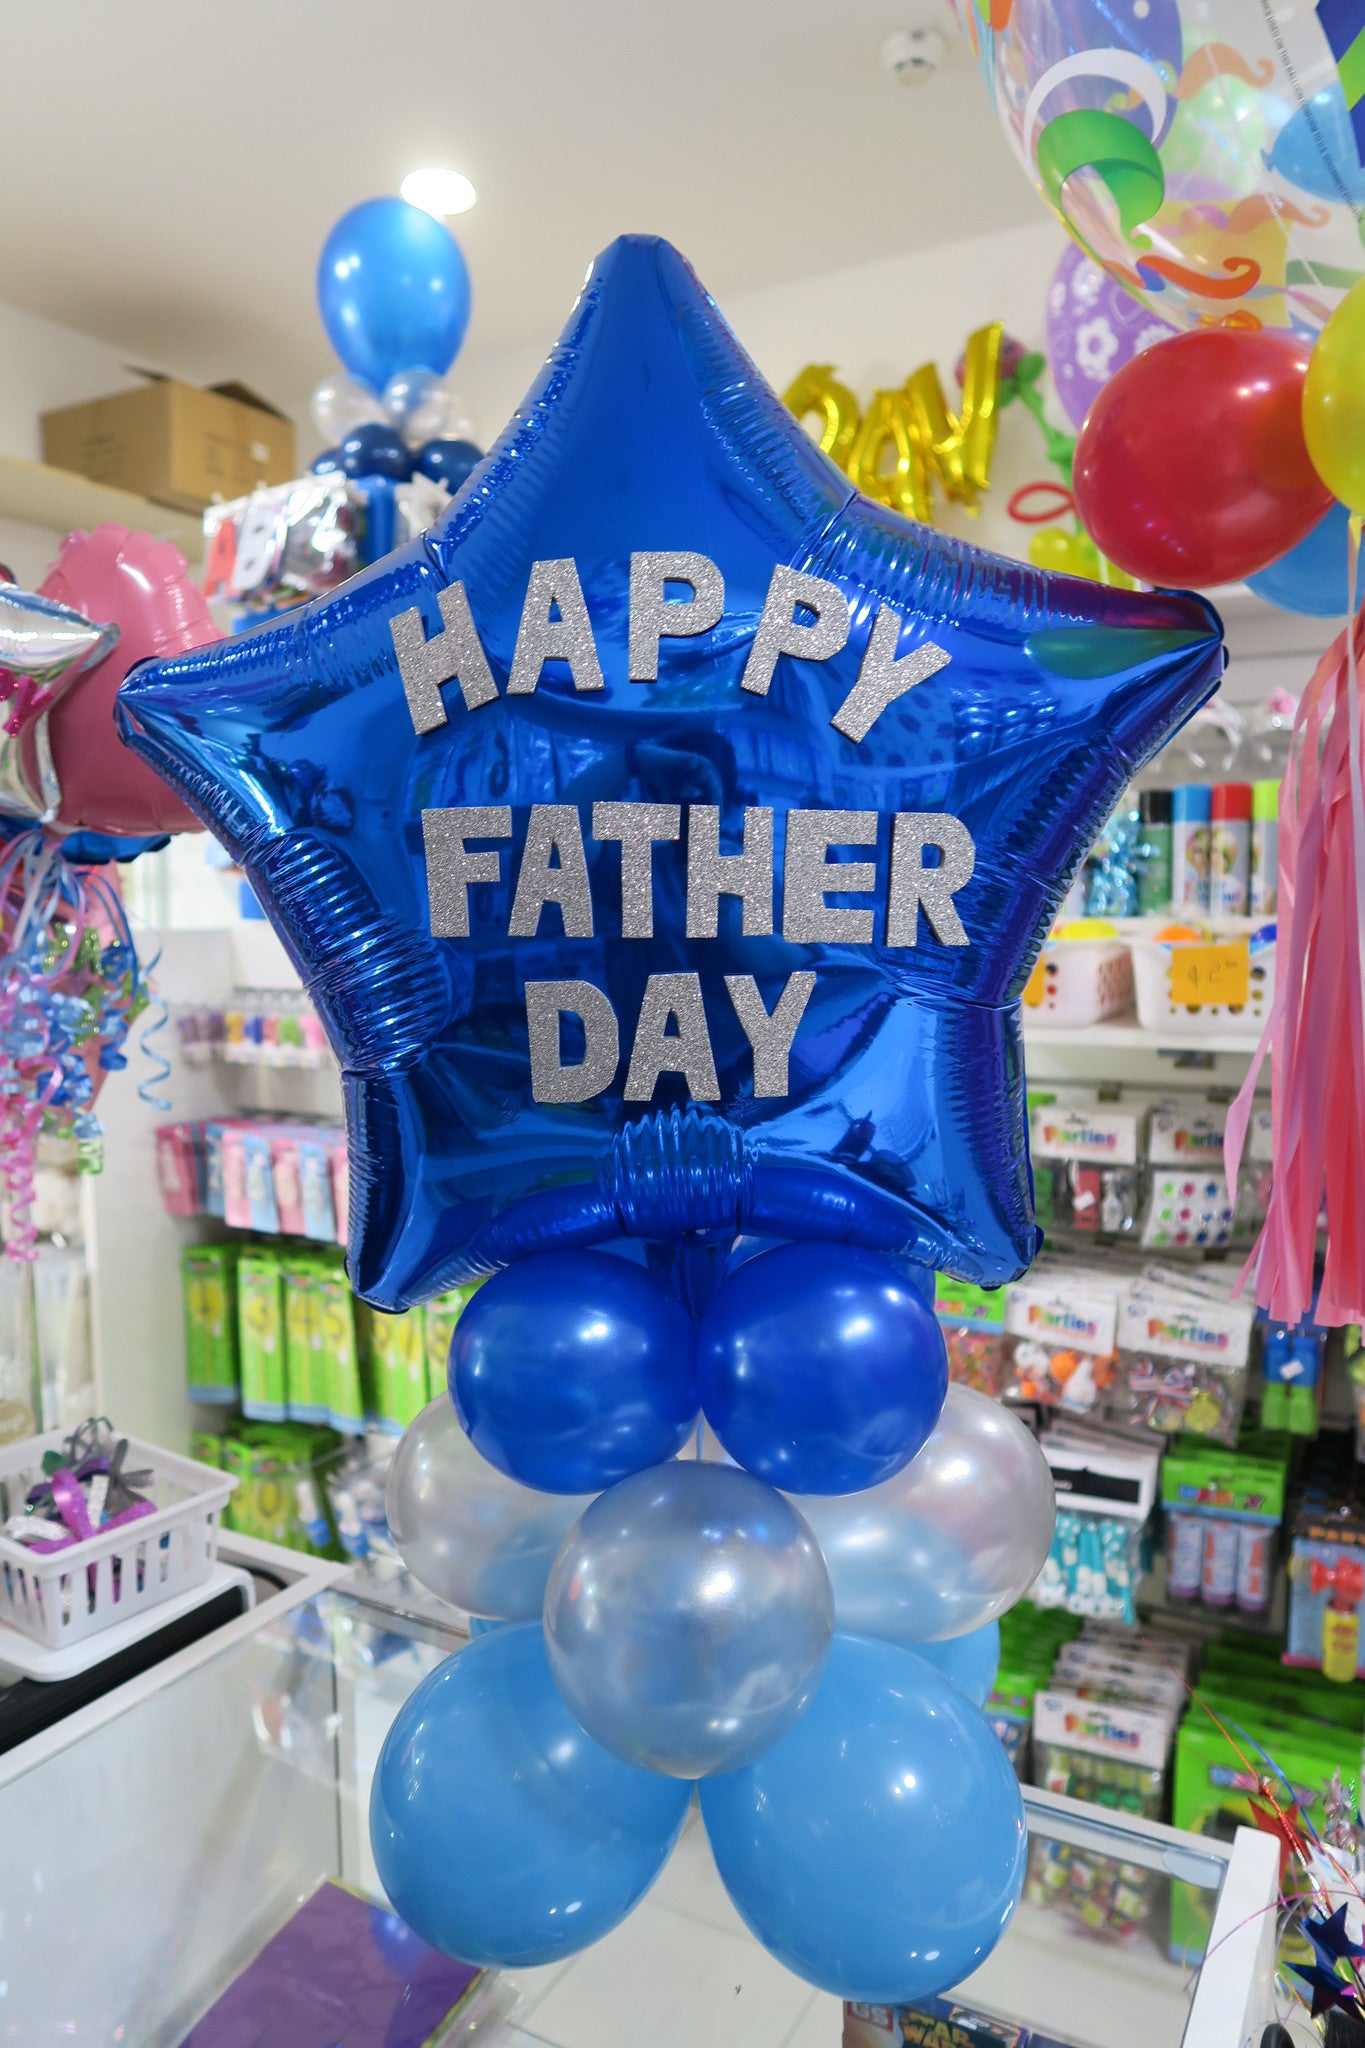 Happy Father Day Table Arrangement